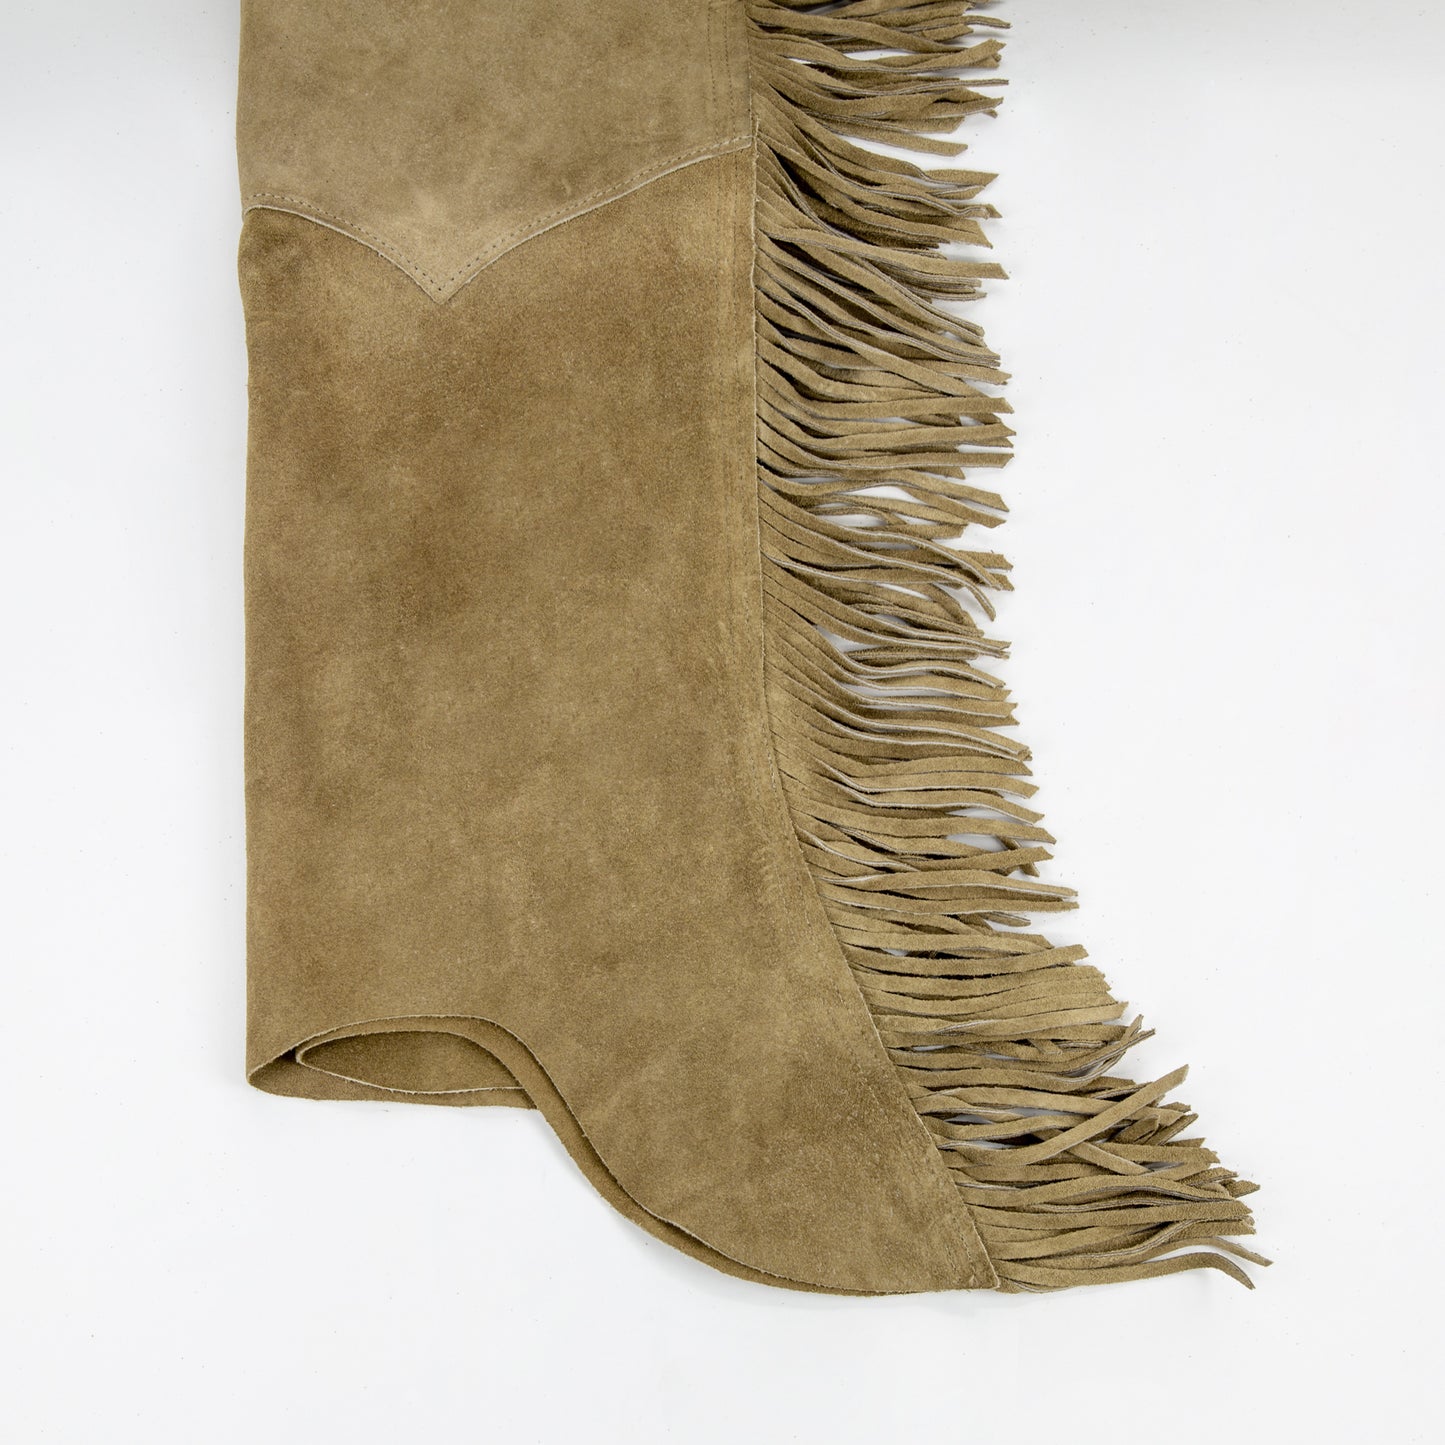 Western Equitation Chaps - Taupe Suede - Fringe - Double Concho